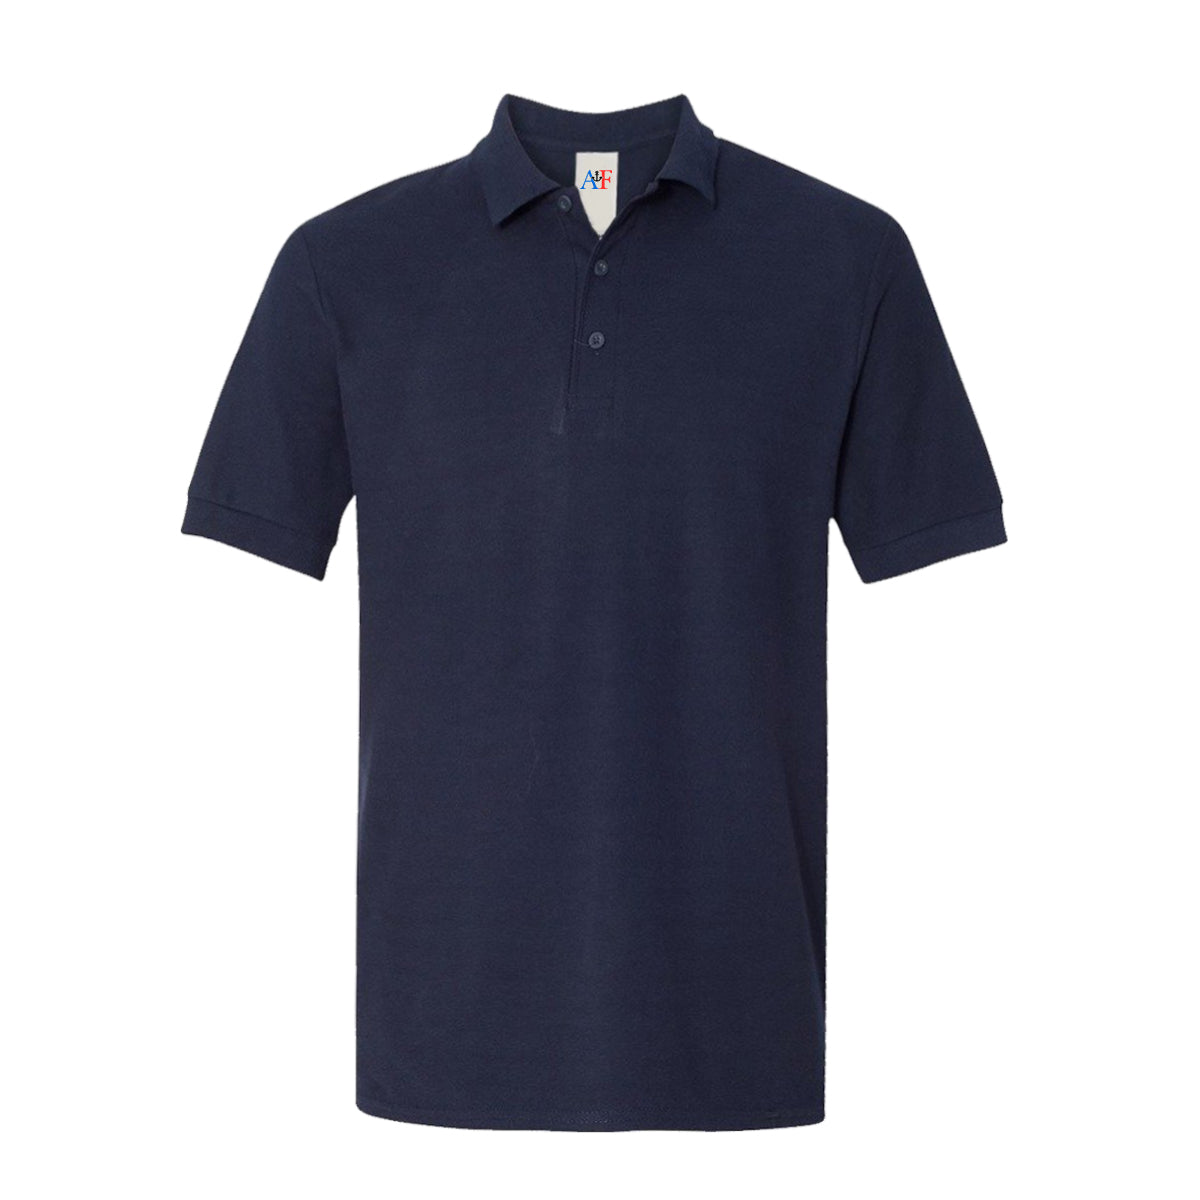 8000 Adults Performance Polo 6 Oz - Bright Navy - AF APPARELS(USA)